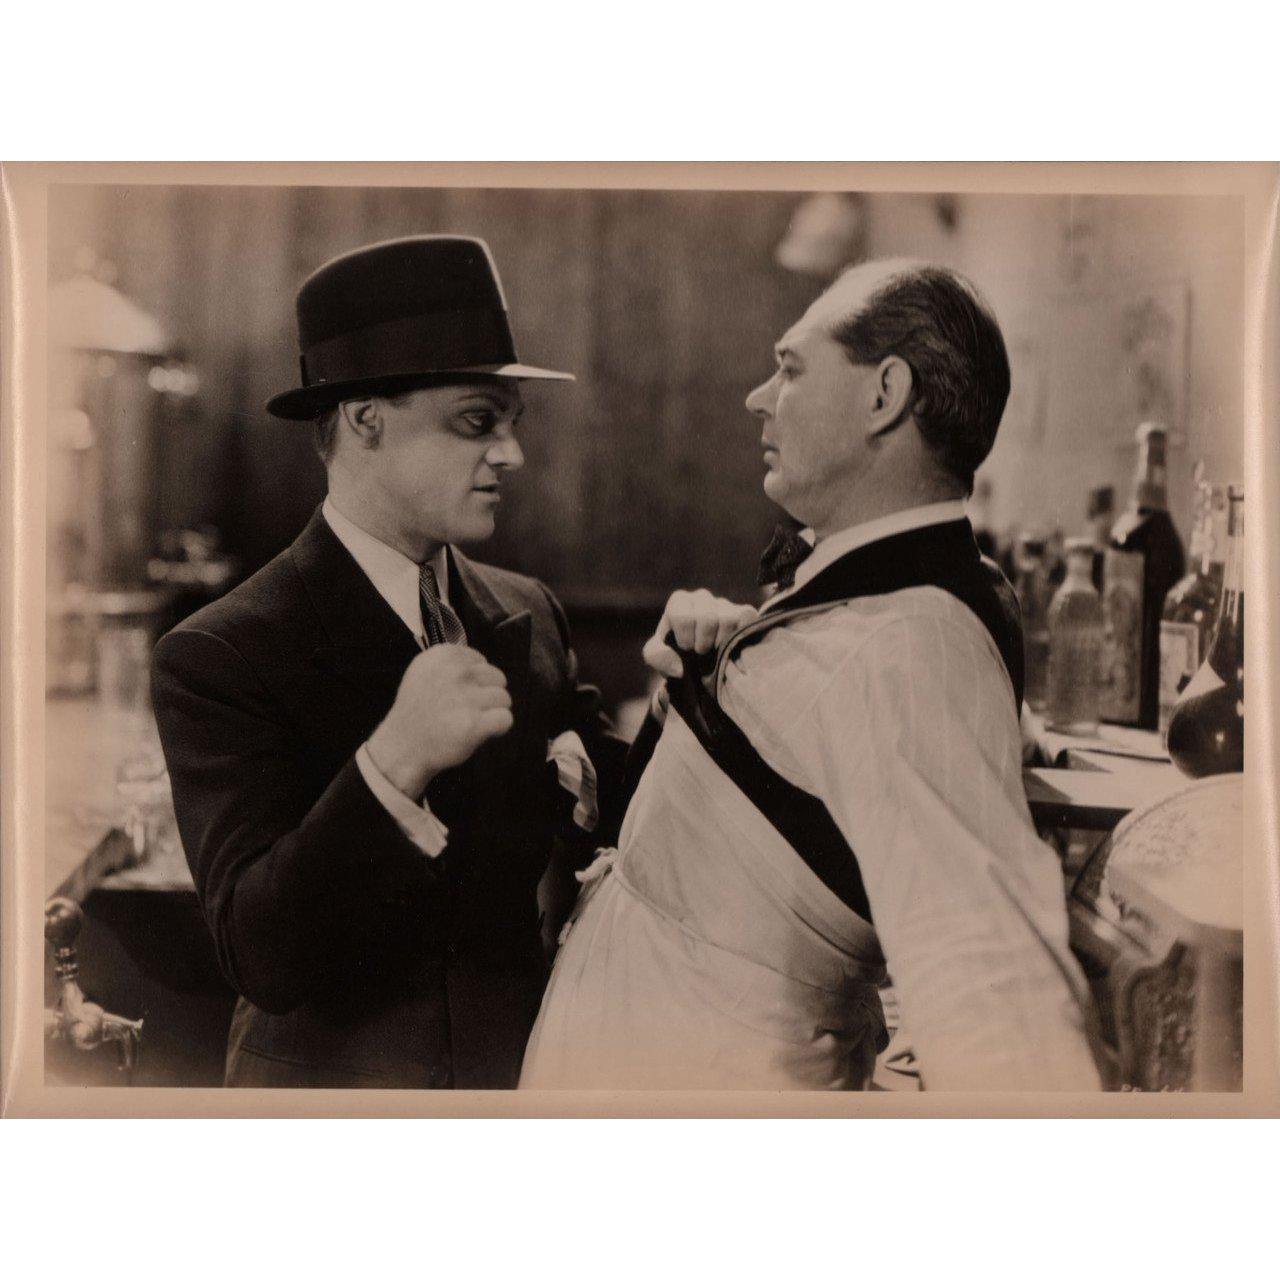 Original 1931 Argentine silver gelatin single-weight photo for the film “The Public Enemy” directed by William A. Wellman with James Cagney / Jean Harlow / Edward Woods / Joan Blondell. Fine condition. Please note: the size is stated in inches and